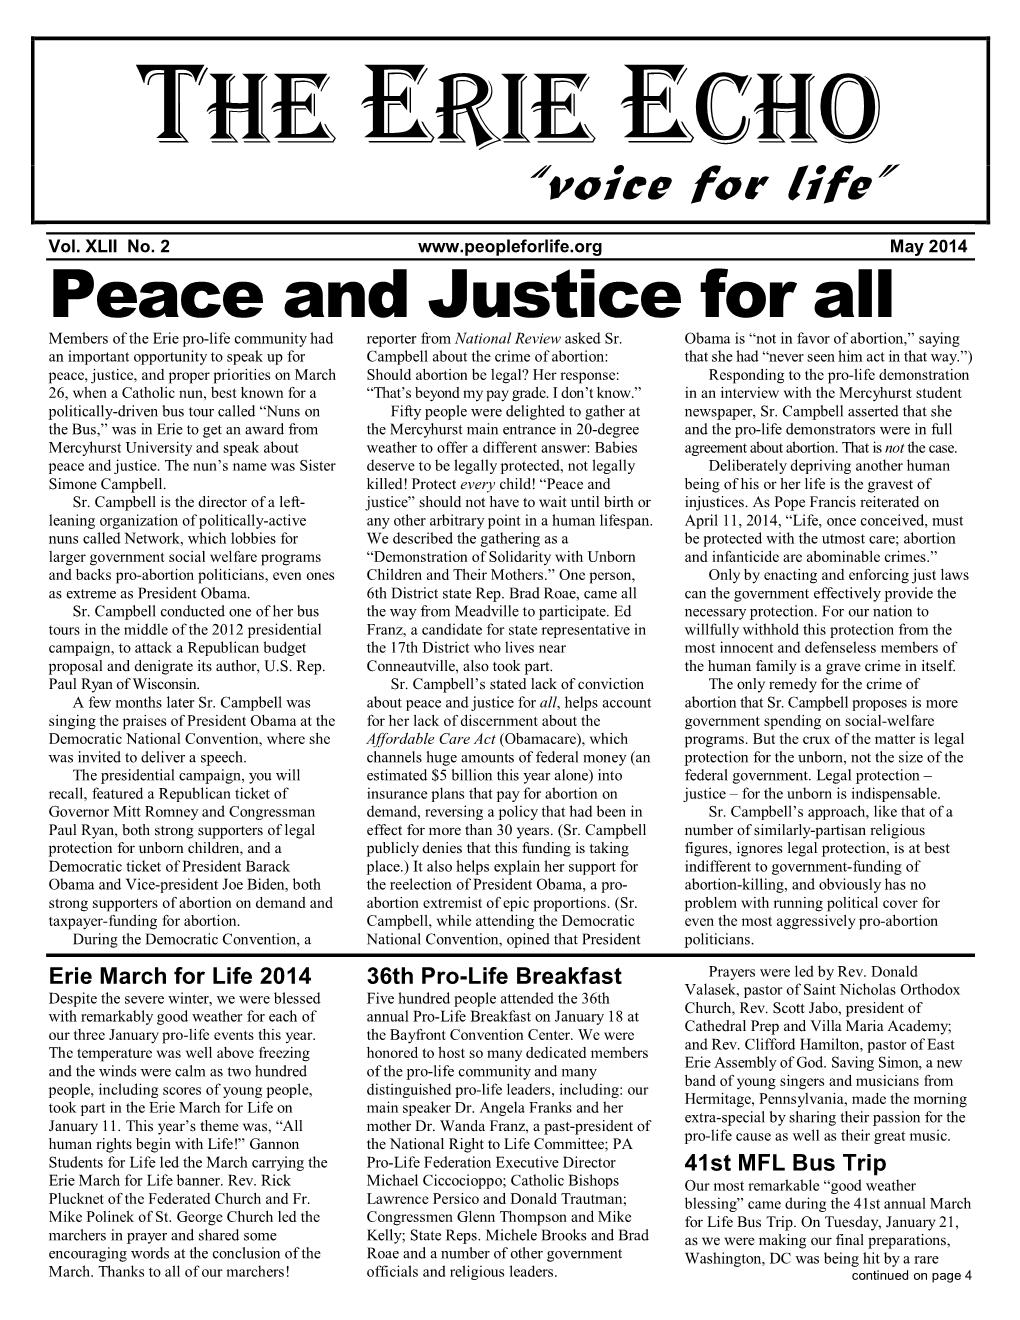 The Erie Echo “Voice for Life”